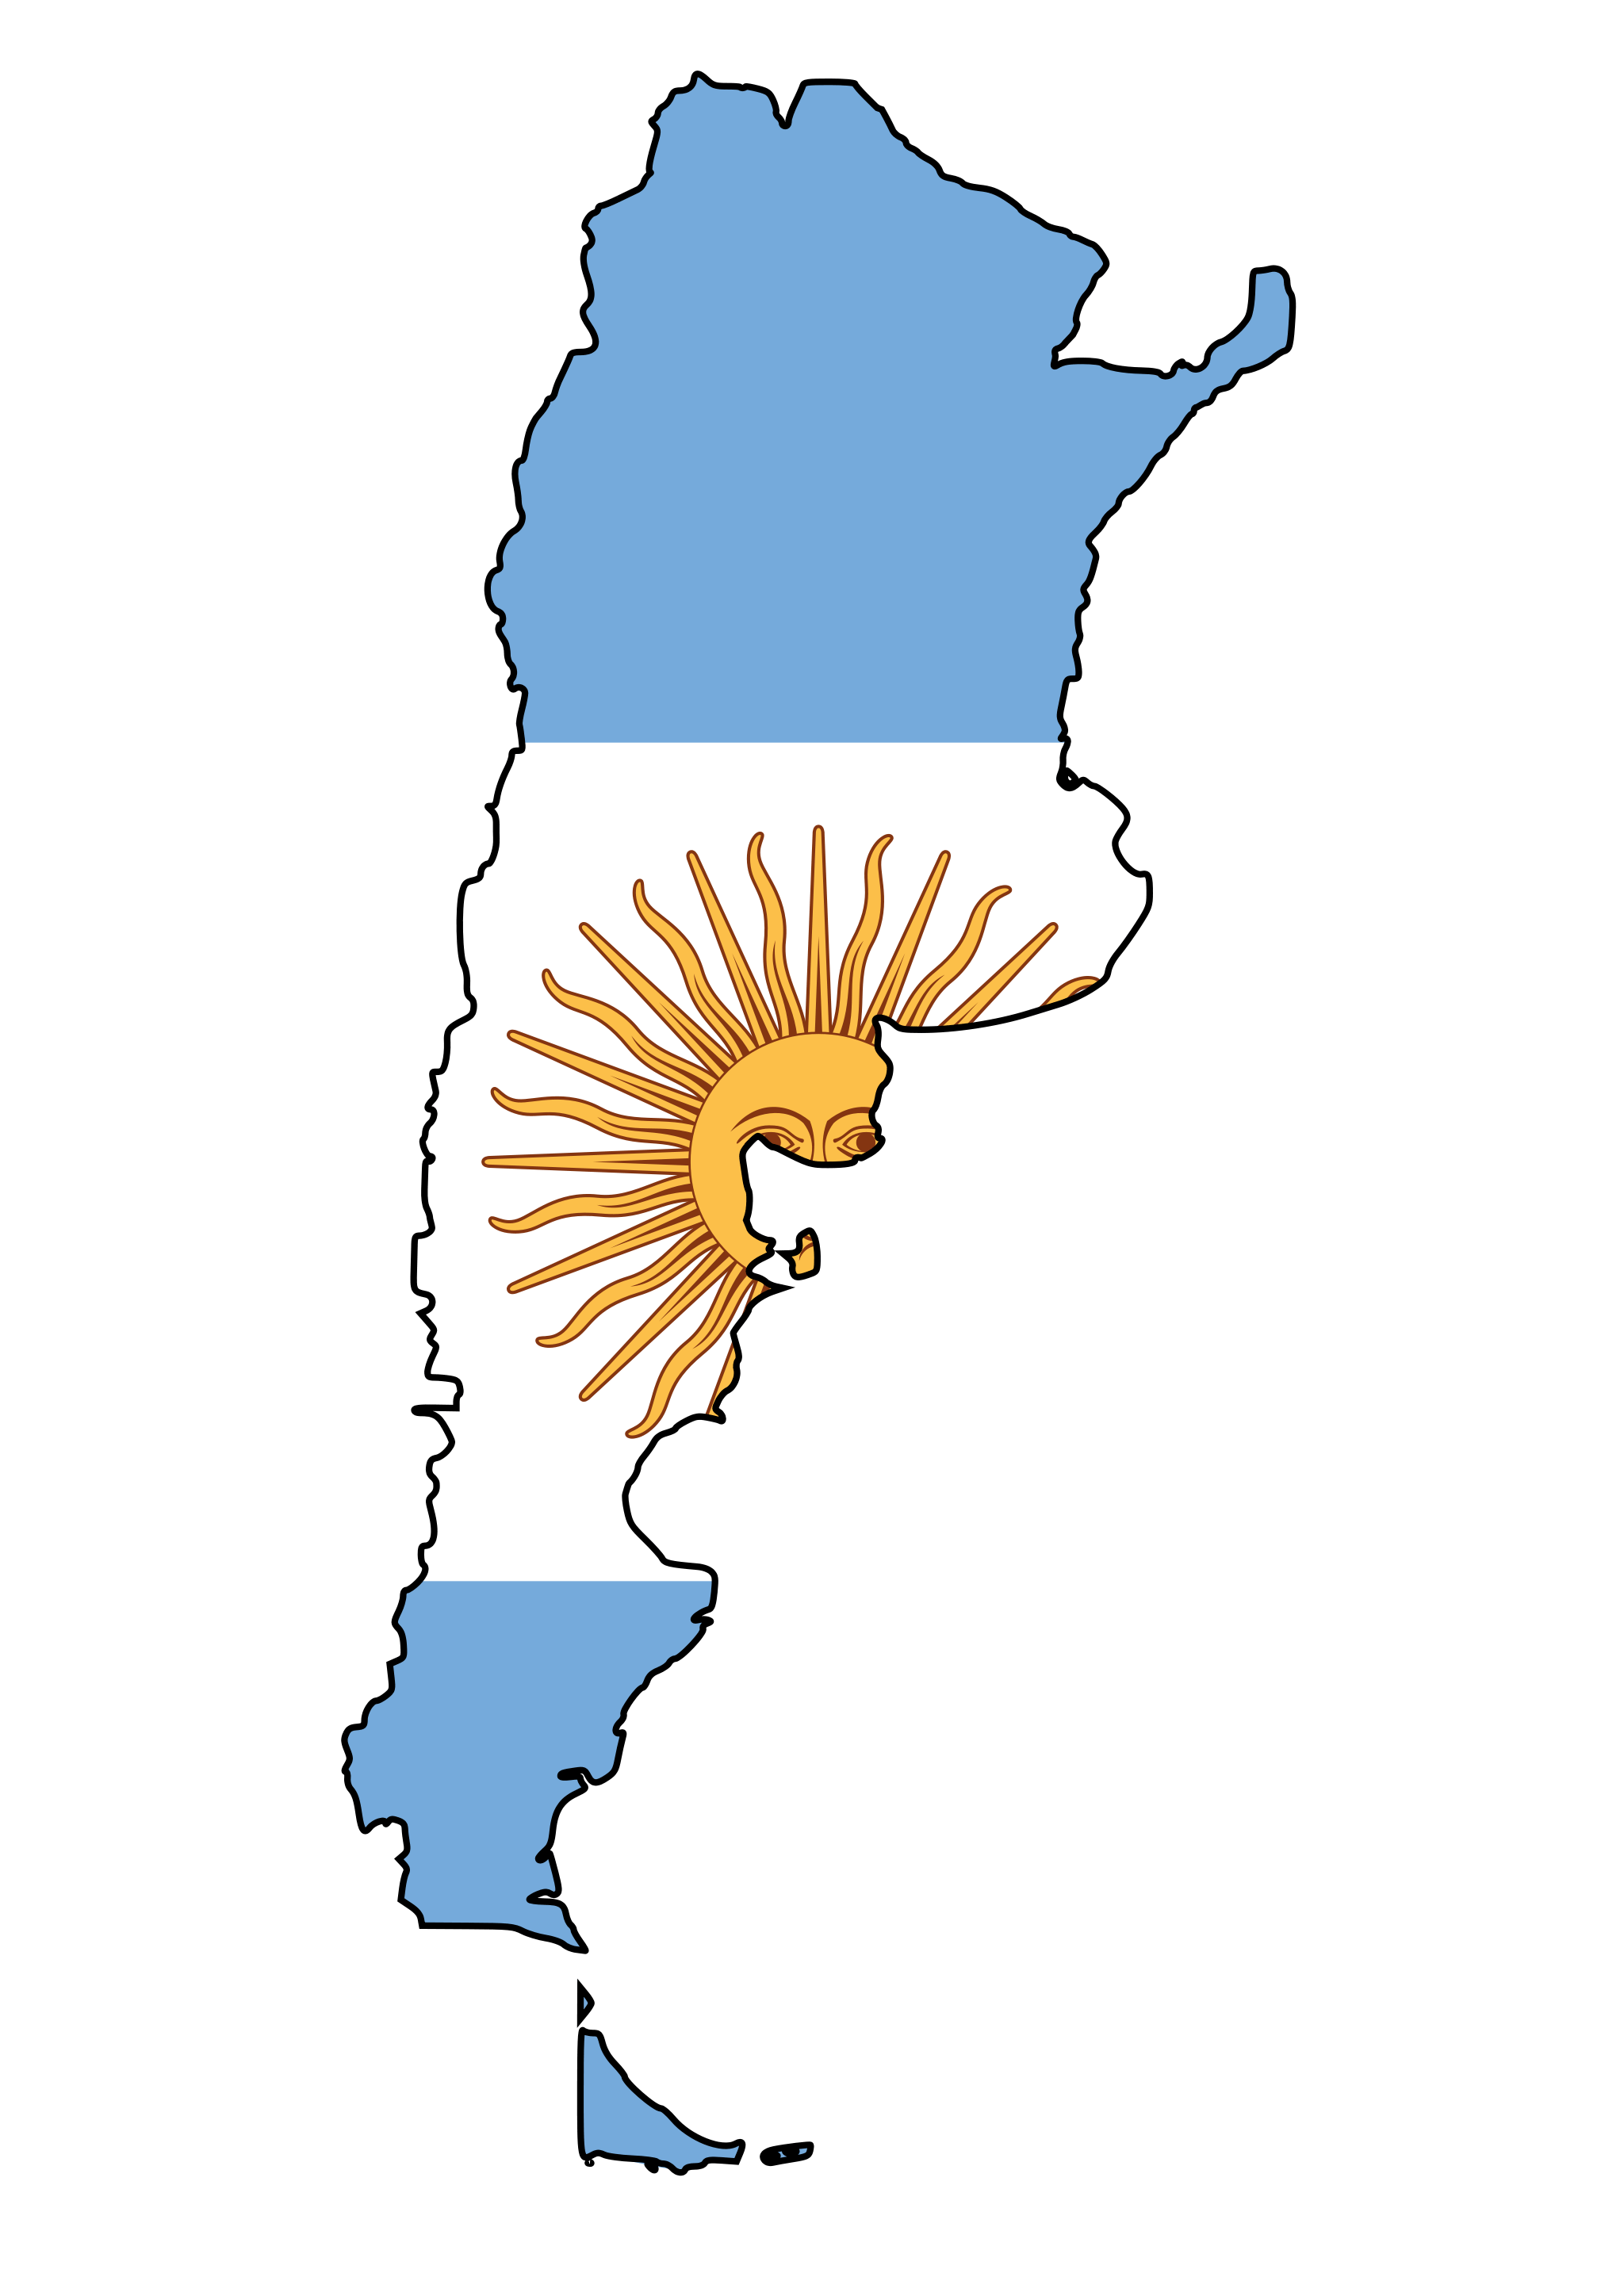 Go To Argentina & Get 63% More Money Free Right Now | 1 USD = 15 Black